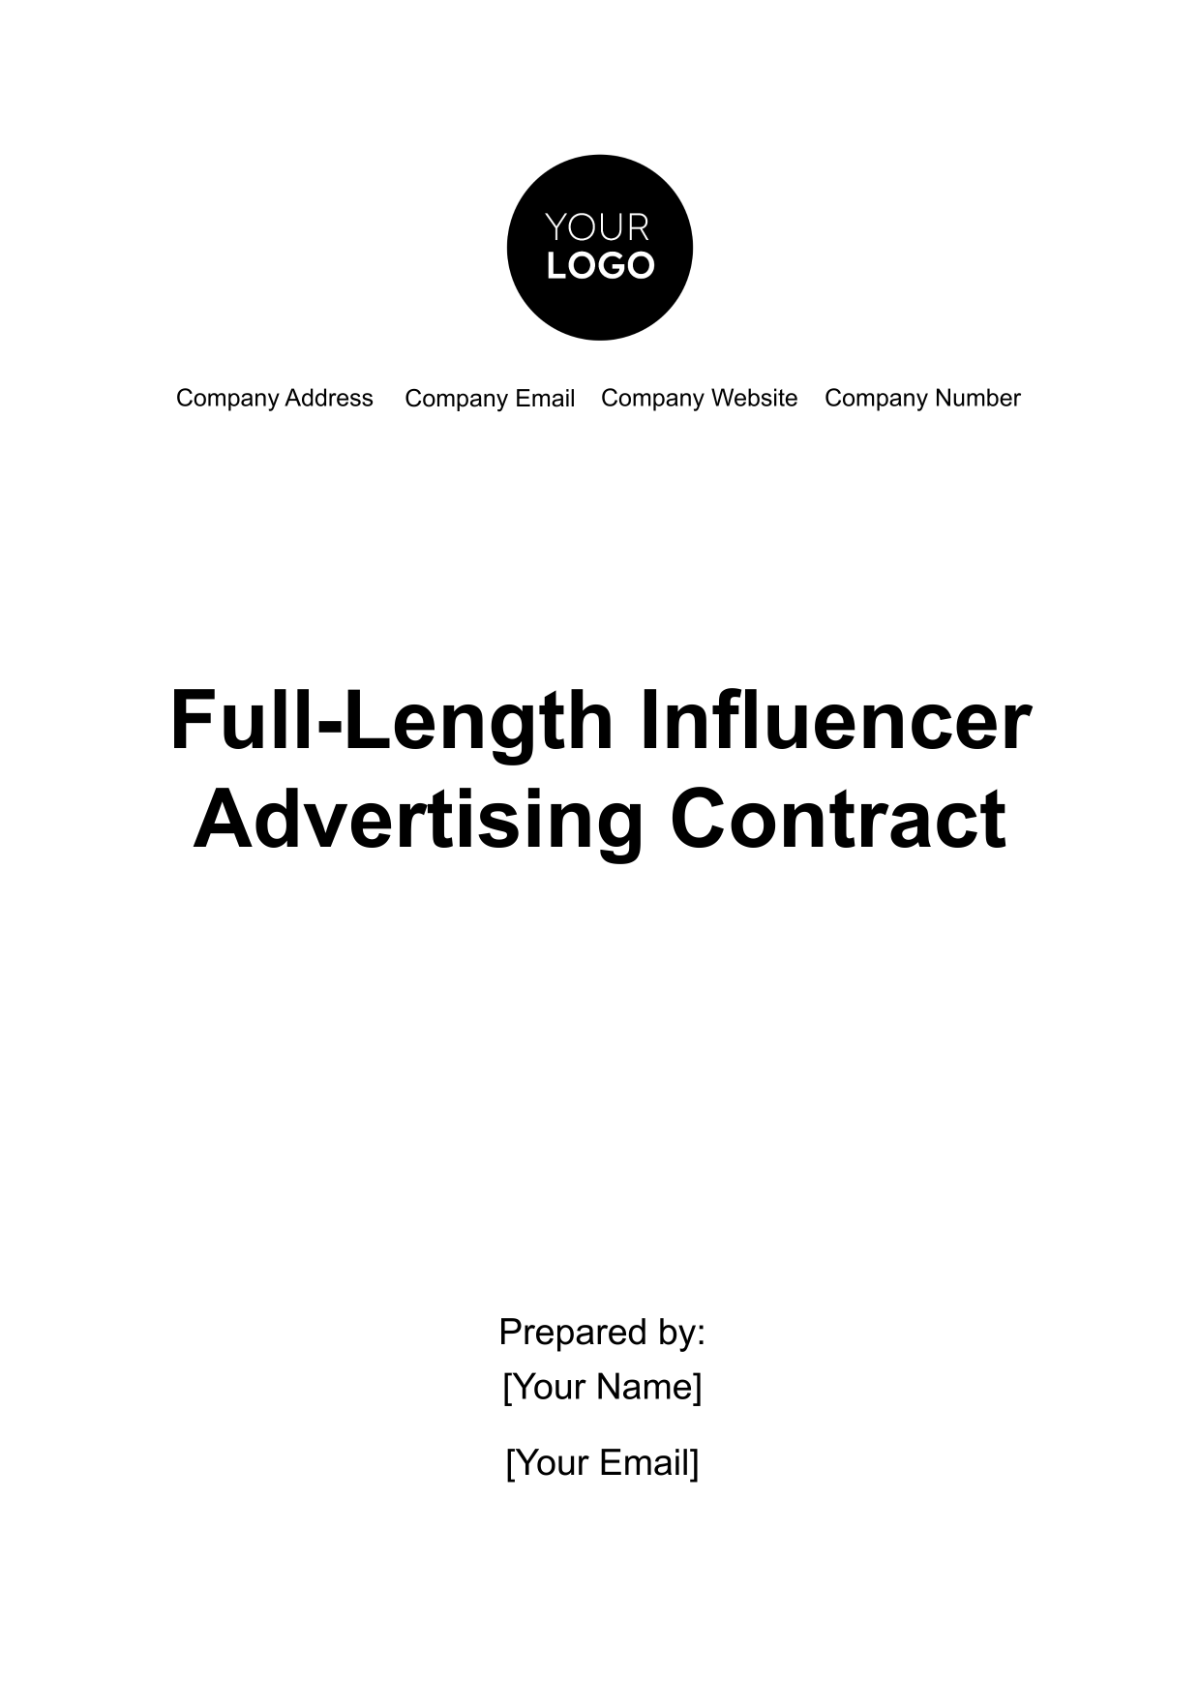 Full-Length Influencer Advertising Contract Template